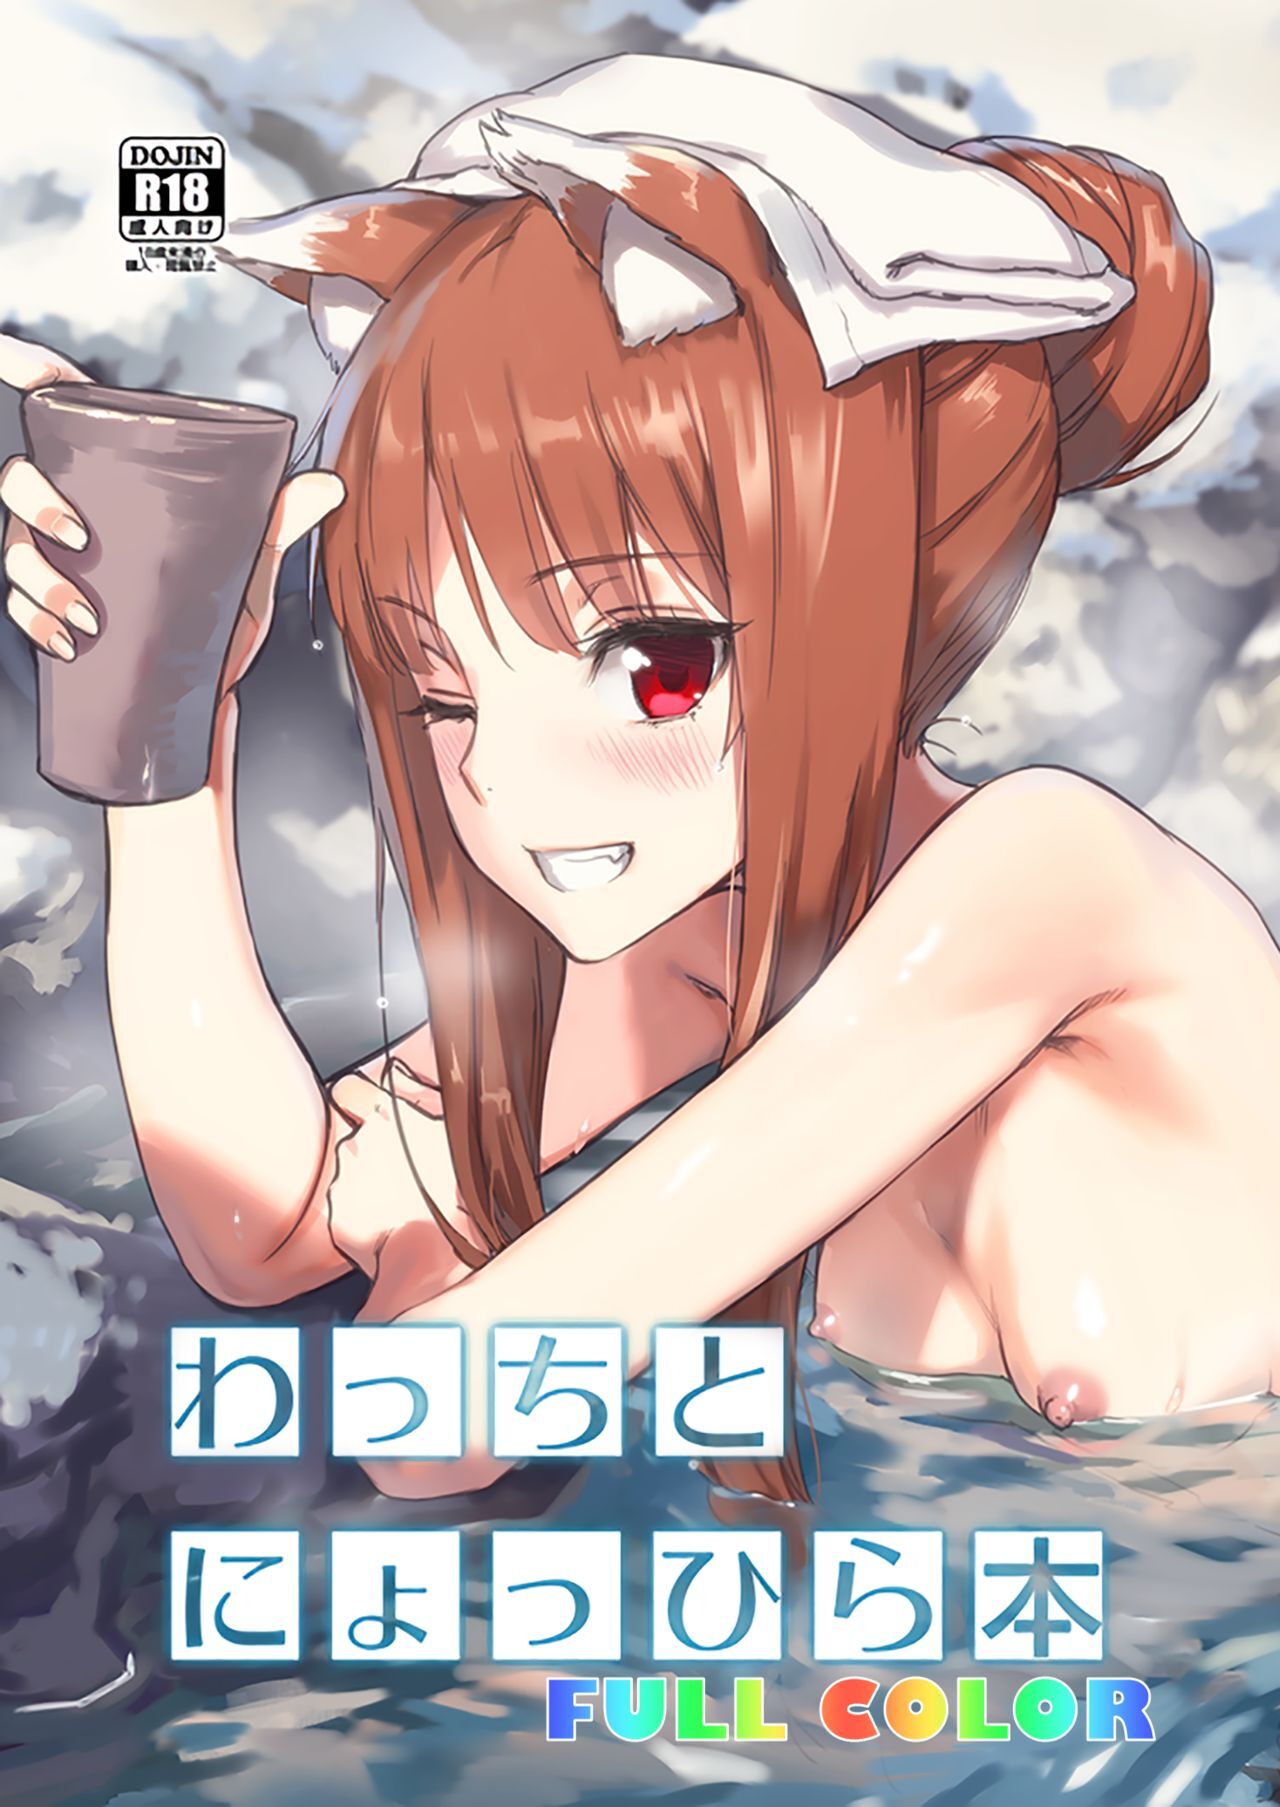 1280px x 1807px - Holo - sorted by number of objects - Free Hentai